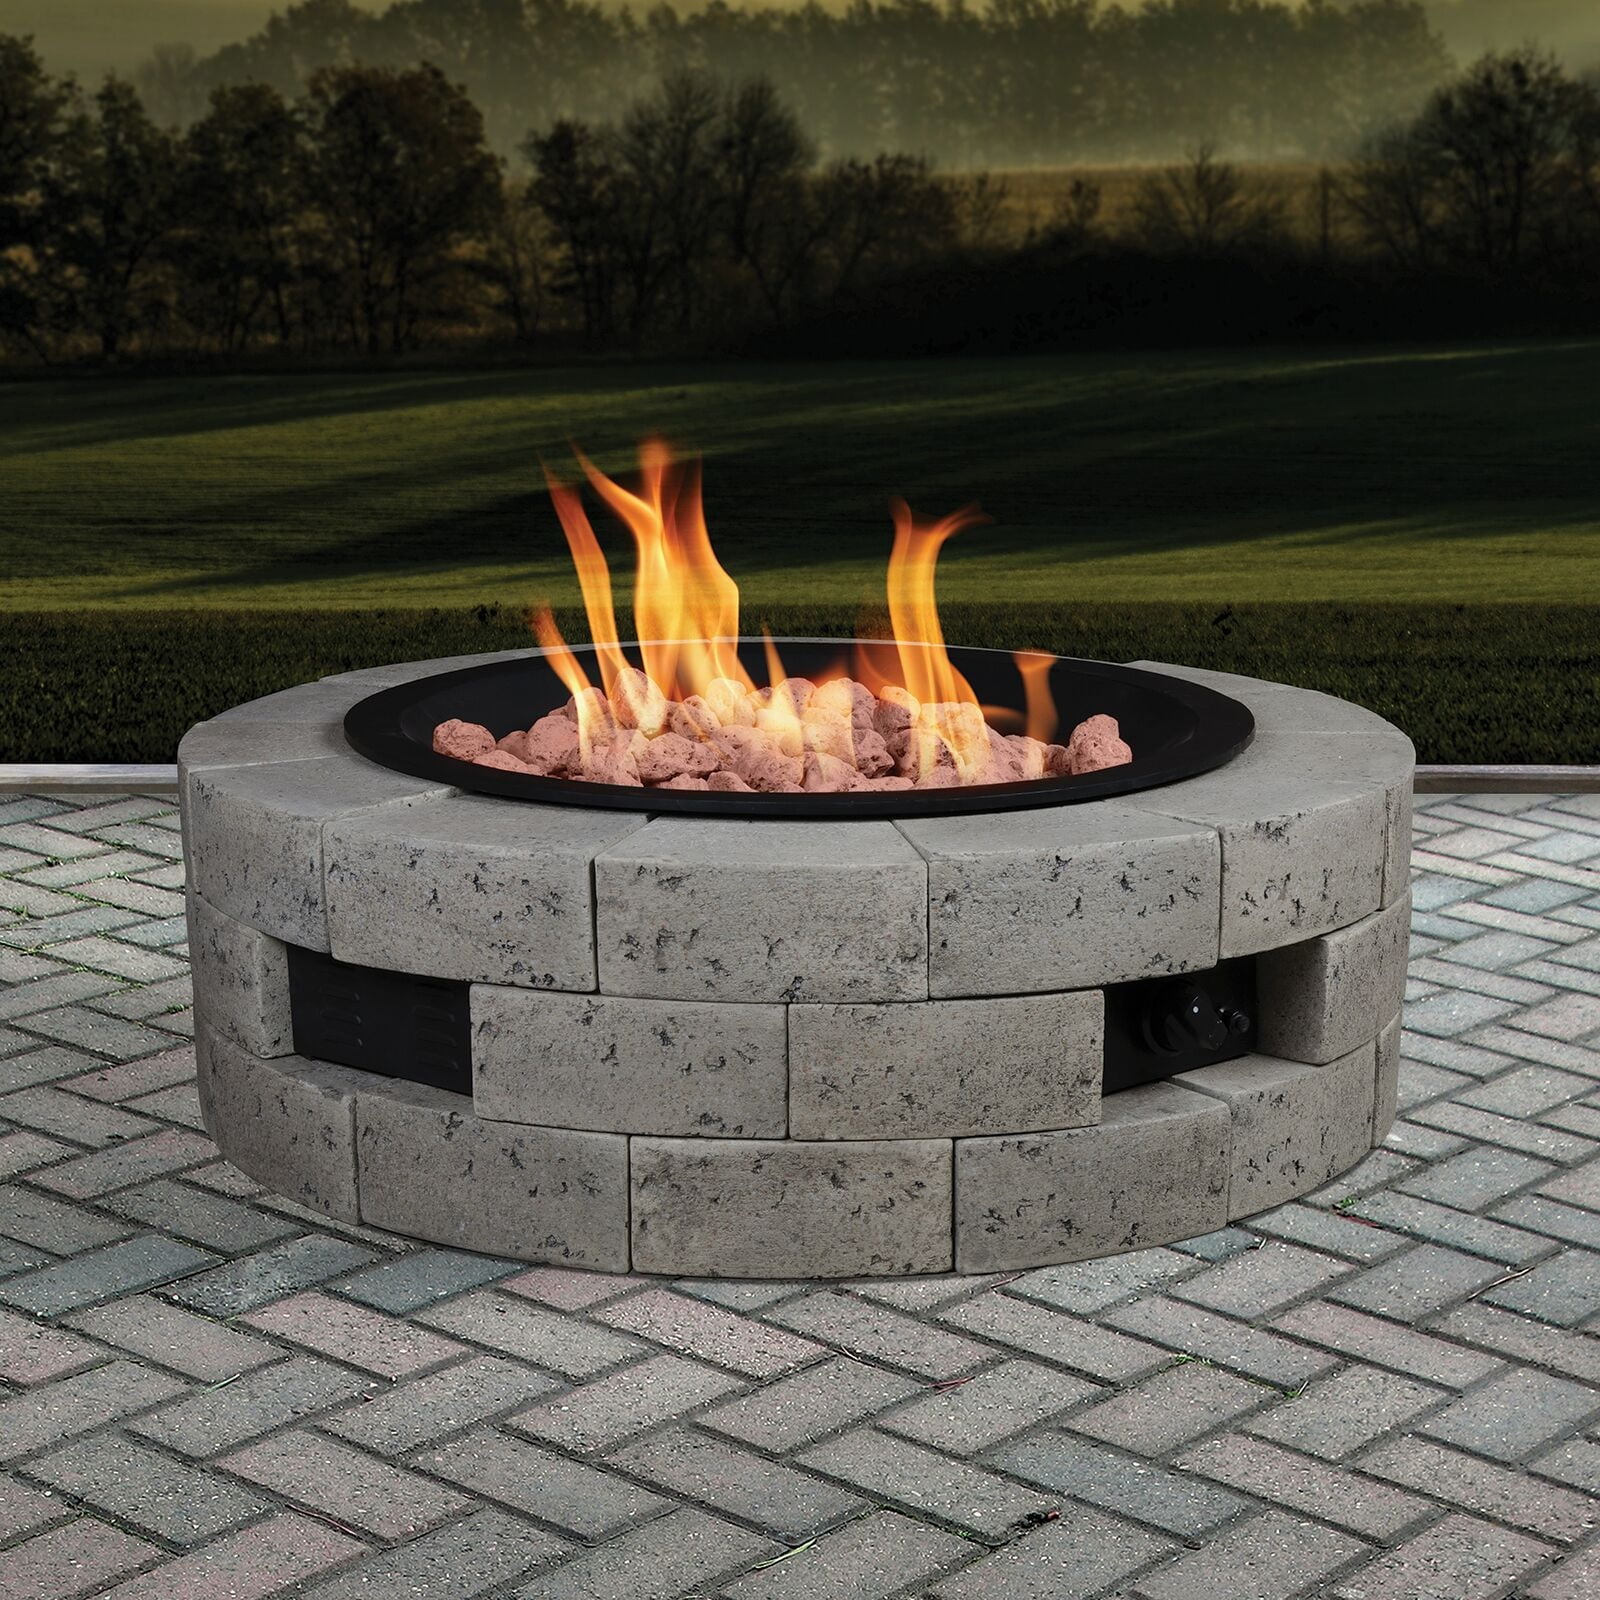 Decorative Round Gas Smokeless Fire Pit, Sears Fire Pit Table